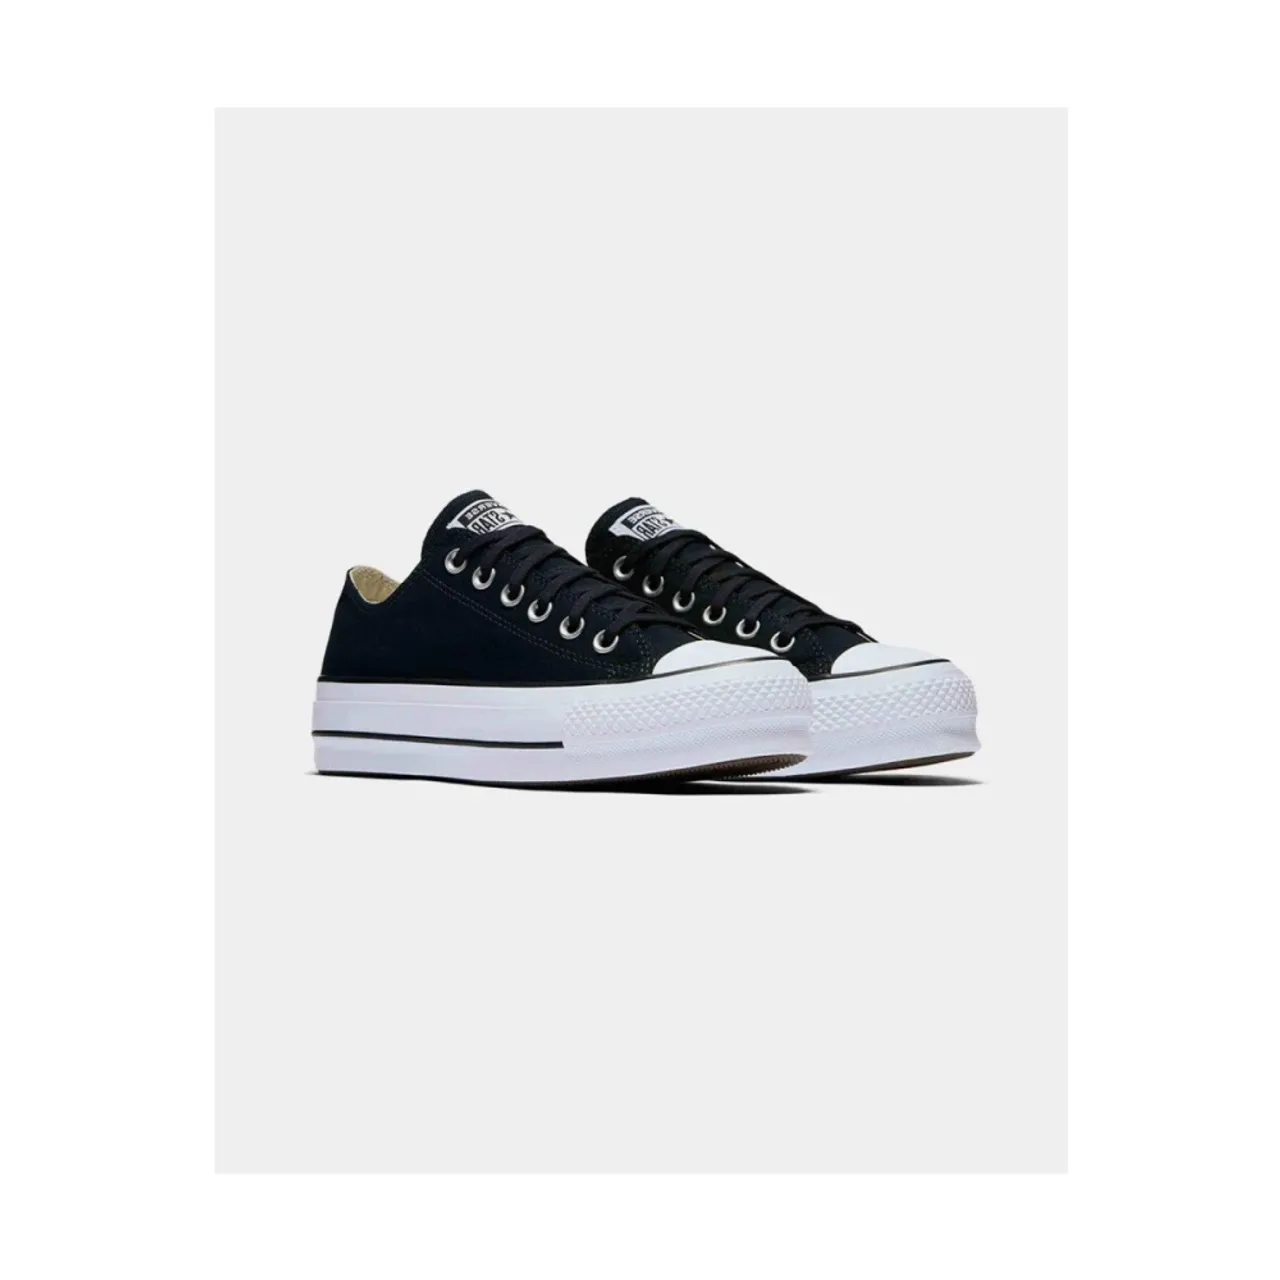 Converse , Chuck Taylor All Star Platform Sneakers ,Black female, Sizes: